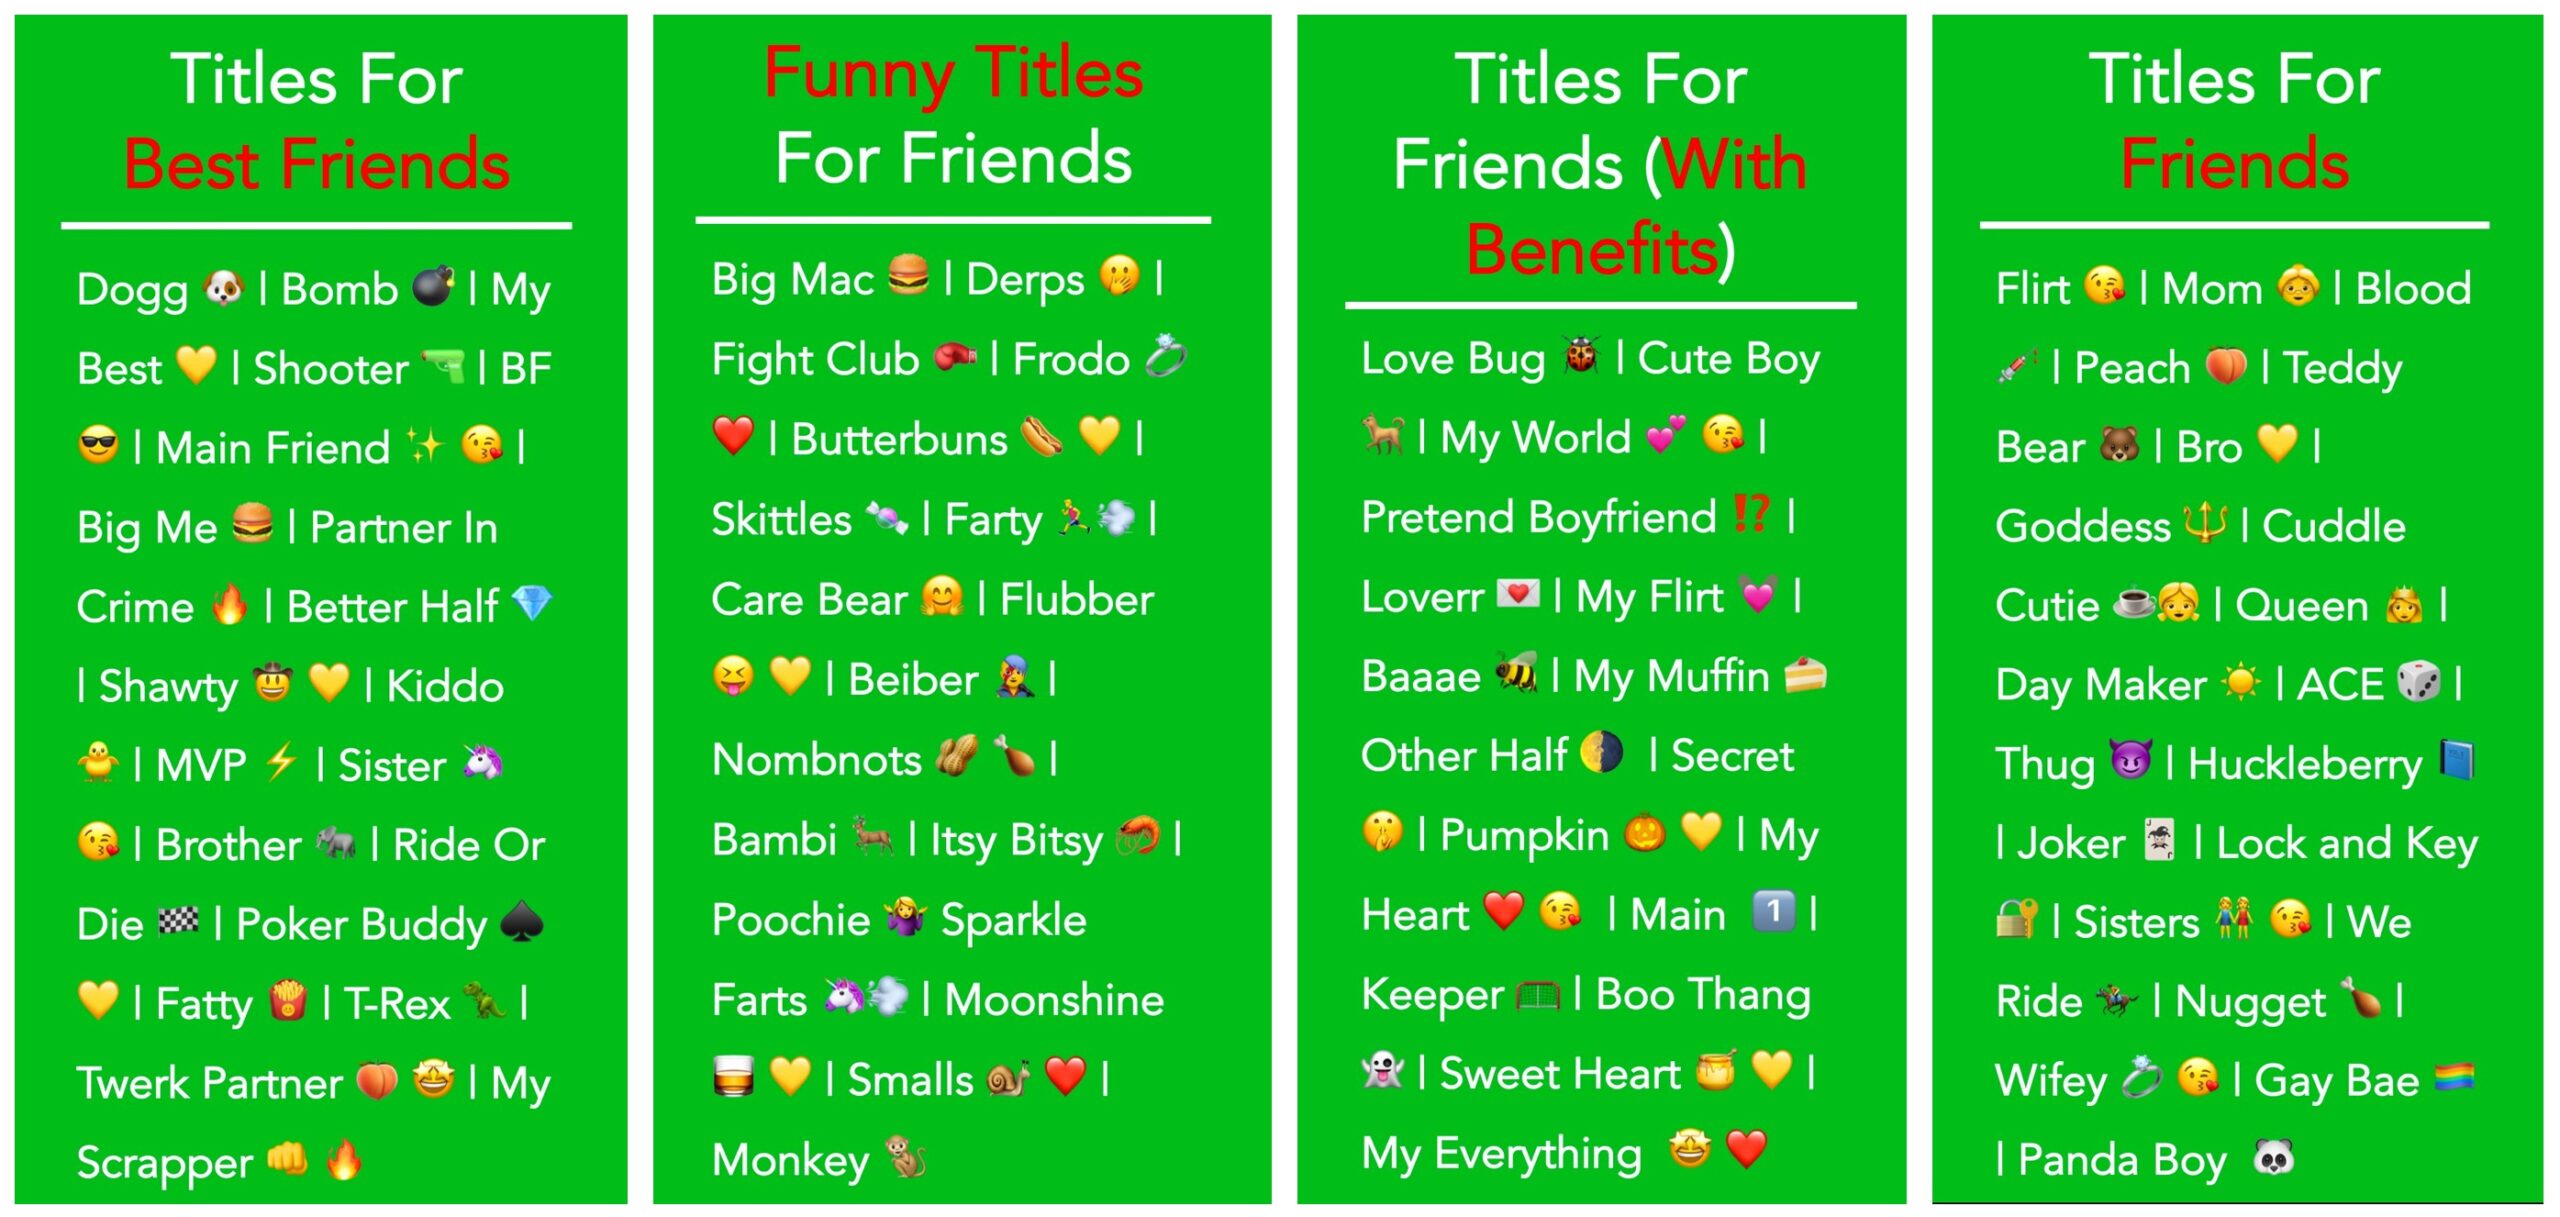 Titles For Friends: Fun & Cute Nicknames | How To Apps